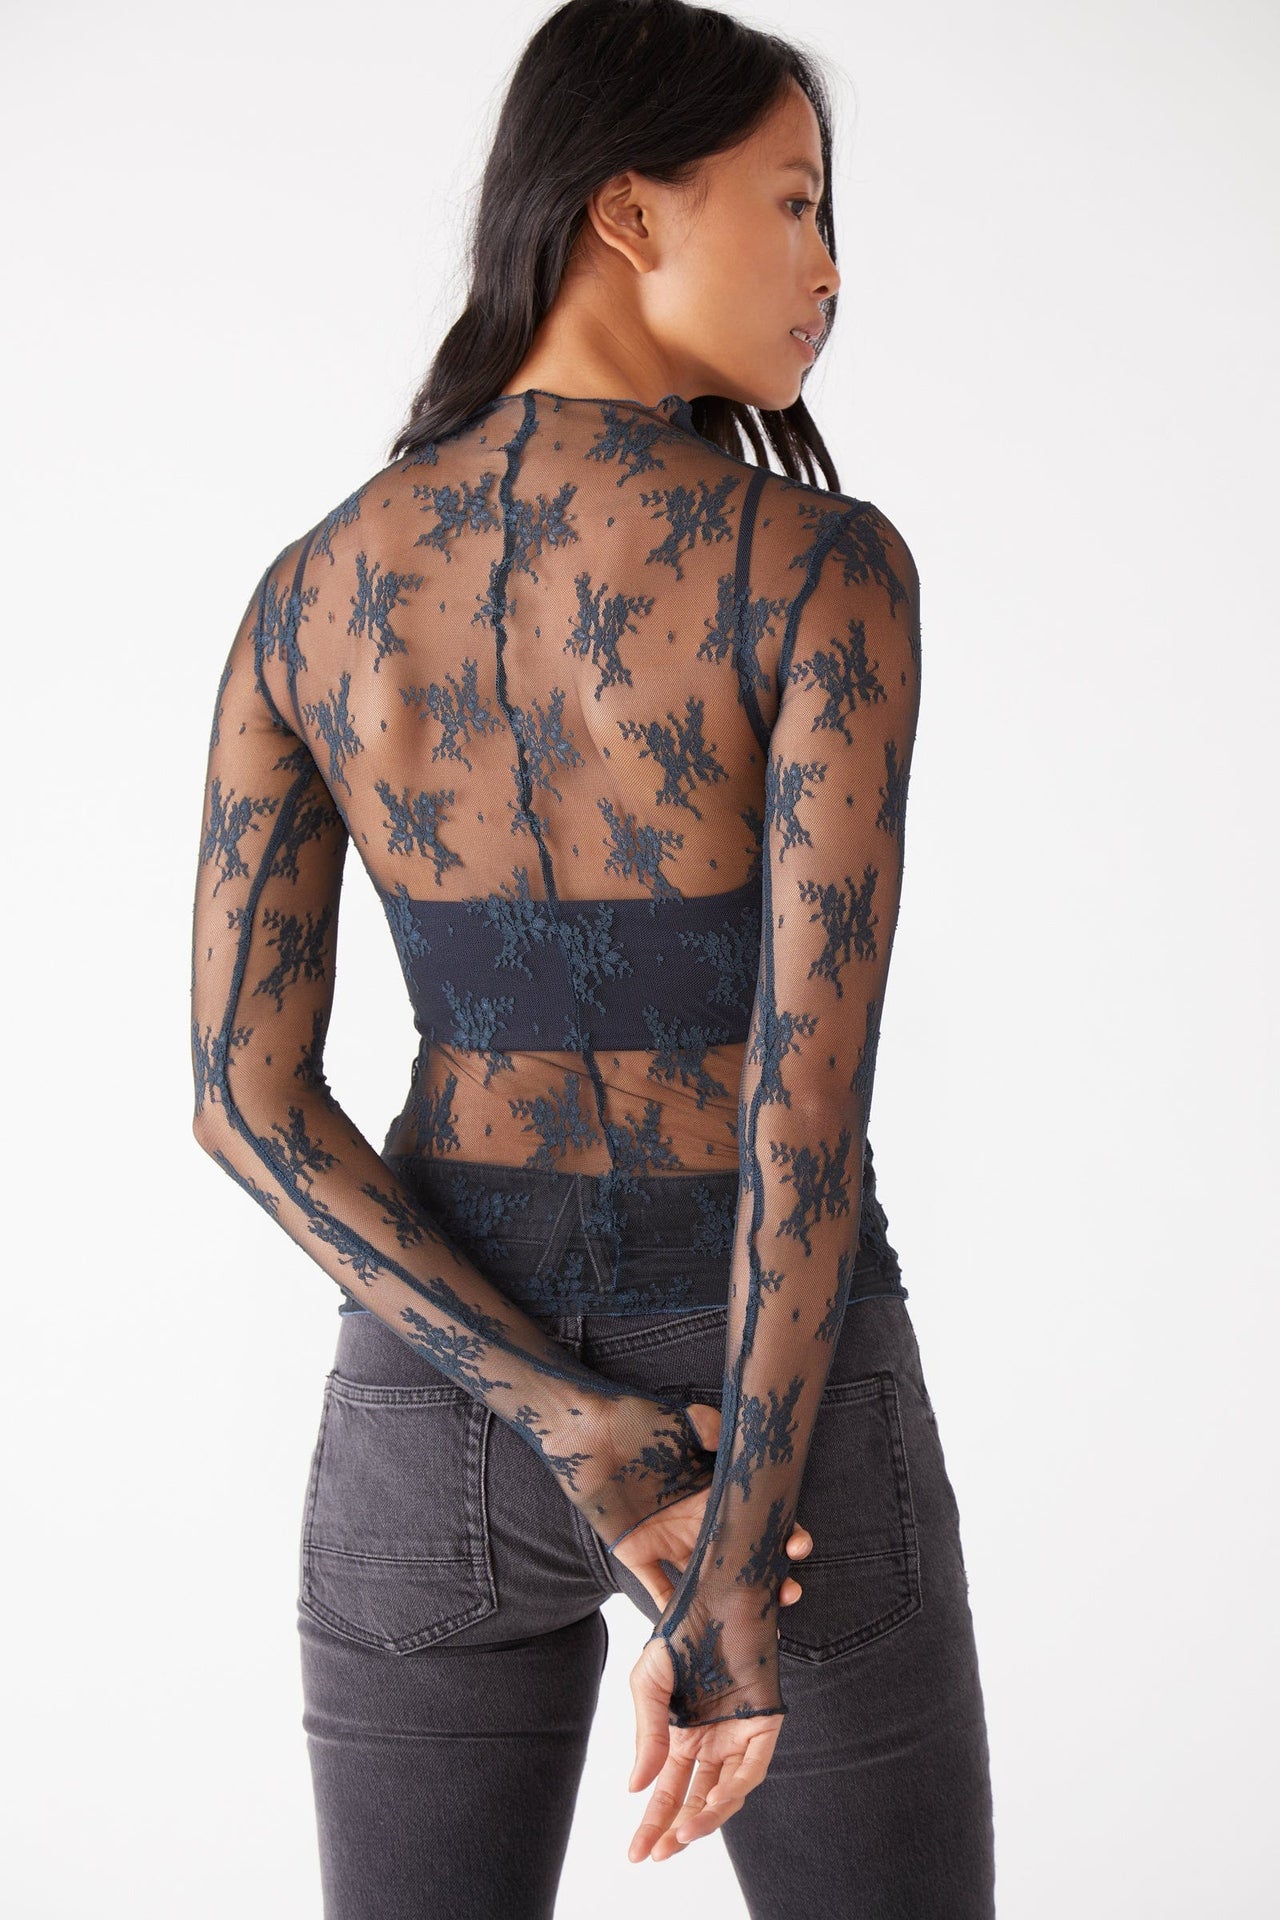 Lady Lux Layering Top Black, Tops Blouses by Free People | LIT Boutique